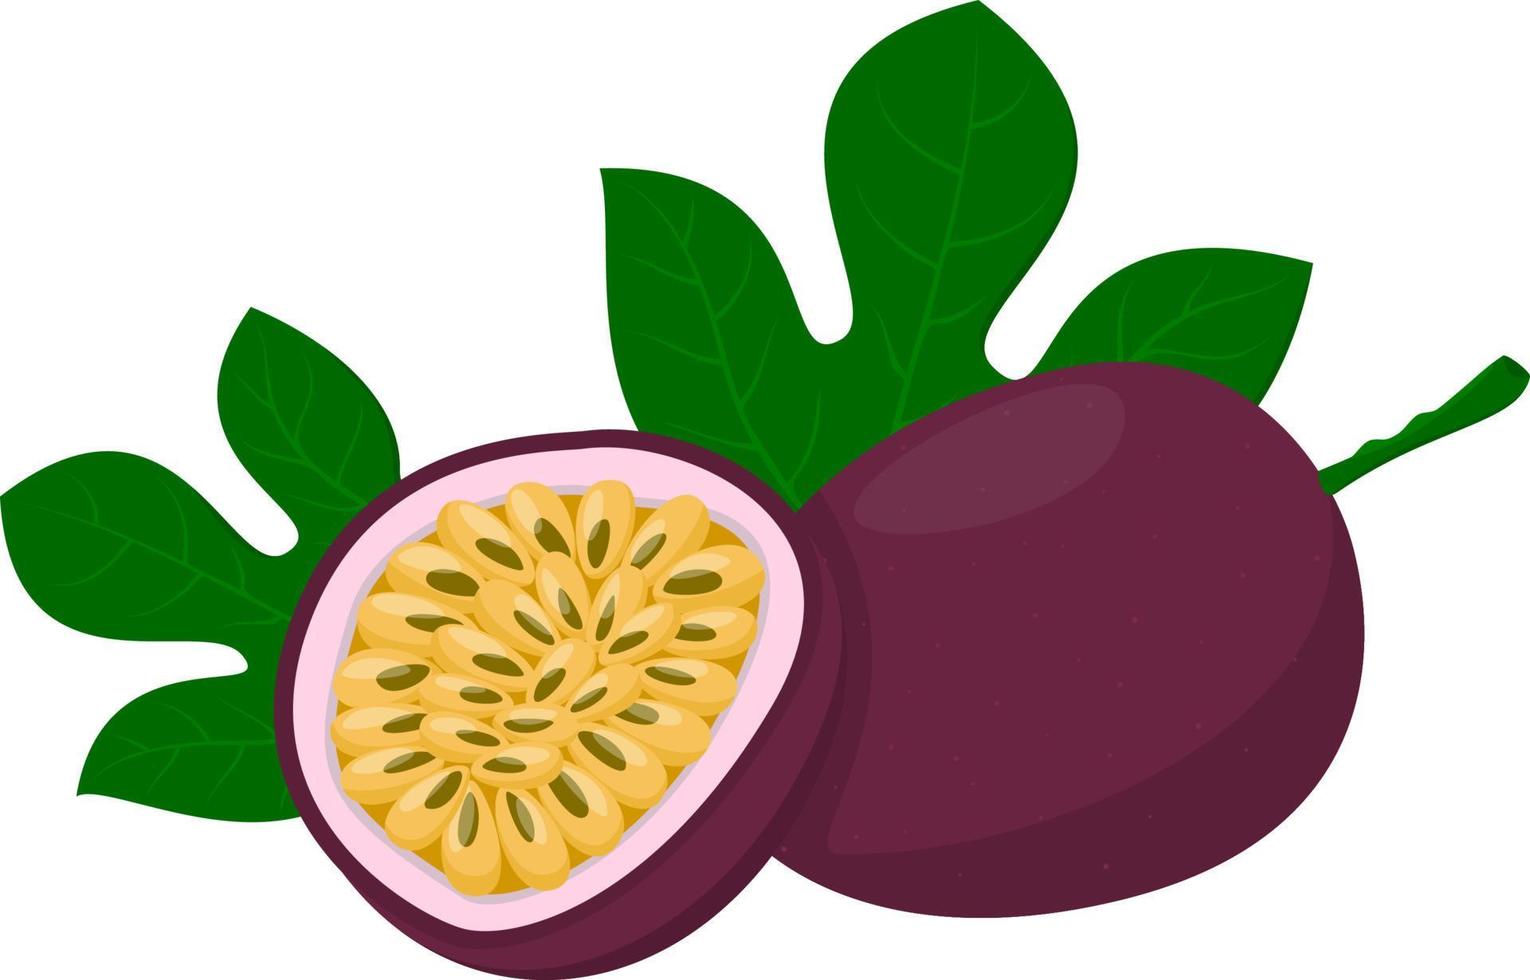 Whole passion fruit with halved passion fruit. Cartoon style. vector illustration isolated on white background